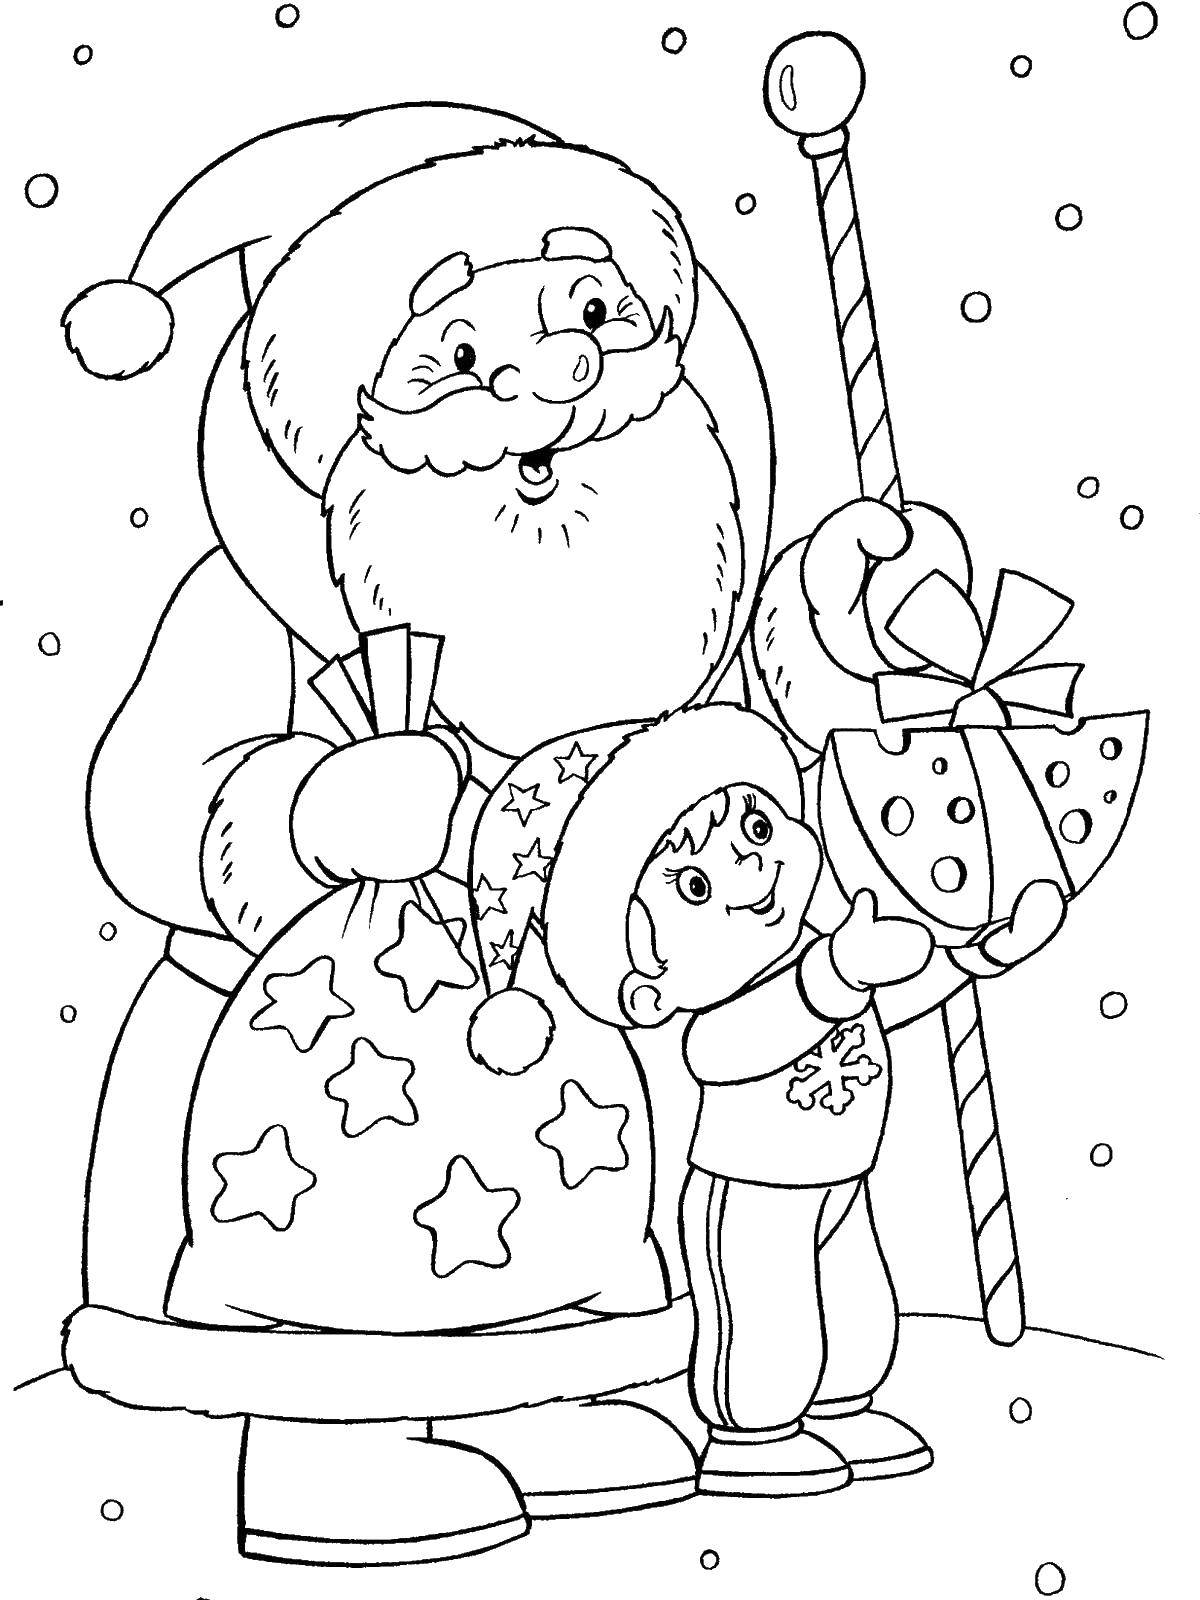 Coloring Santa Claus and boy. Category Coloring pages for kids. Tags:  the watermelon, boy, Santa Claus.